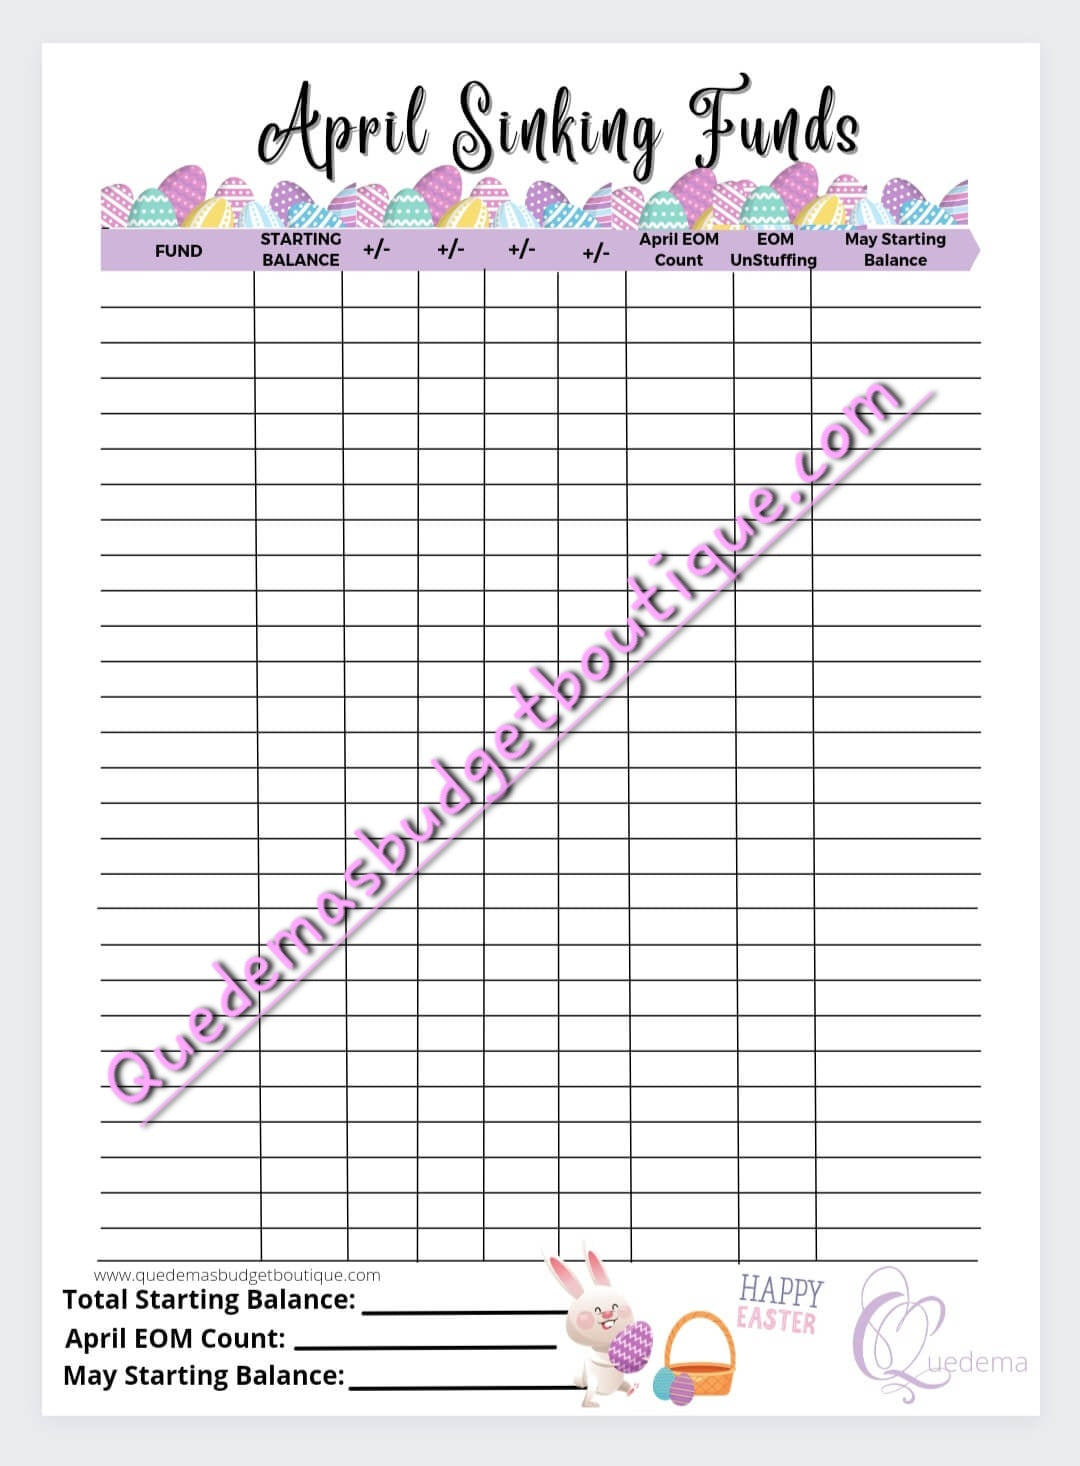 April Sinking Funds Tracker! Printable!